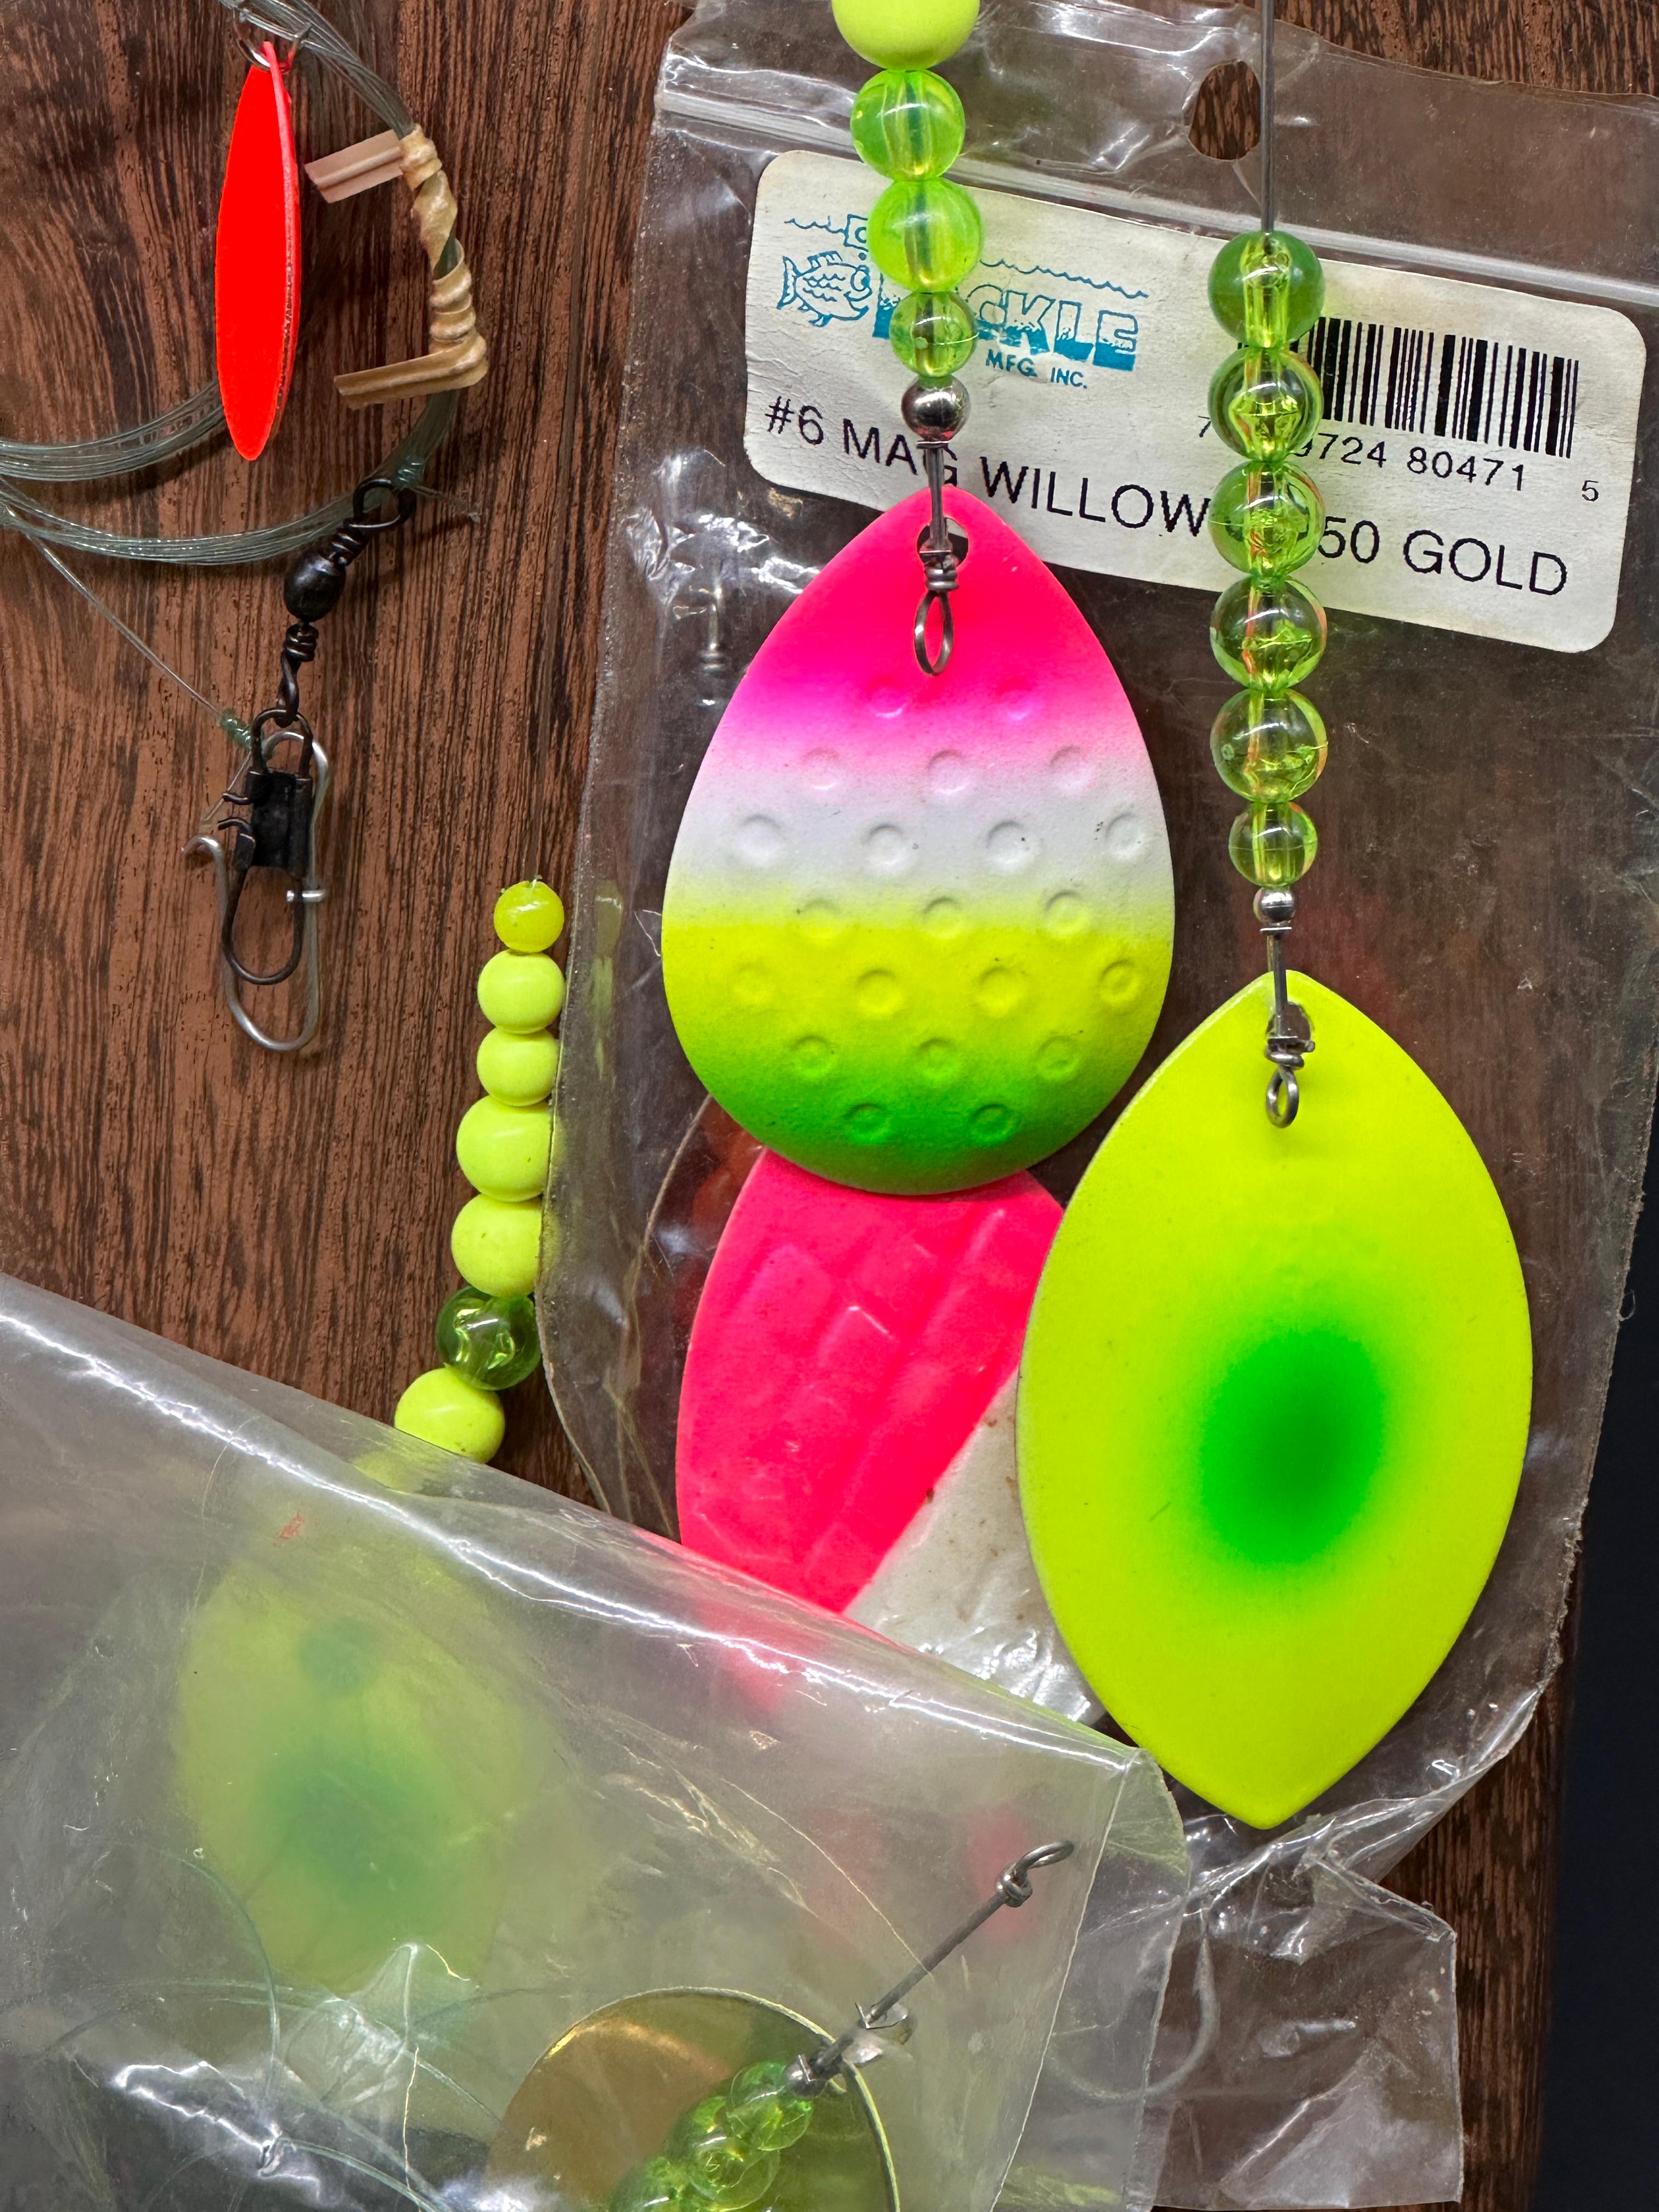 Misc. Fishing Lure's, Spinners and More